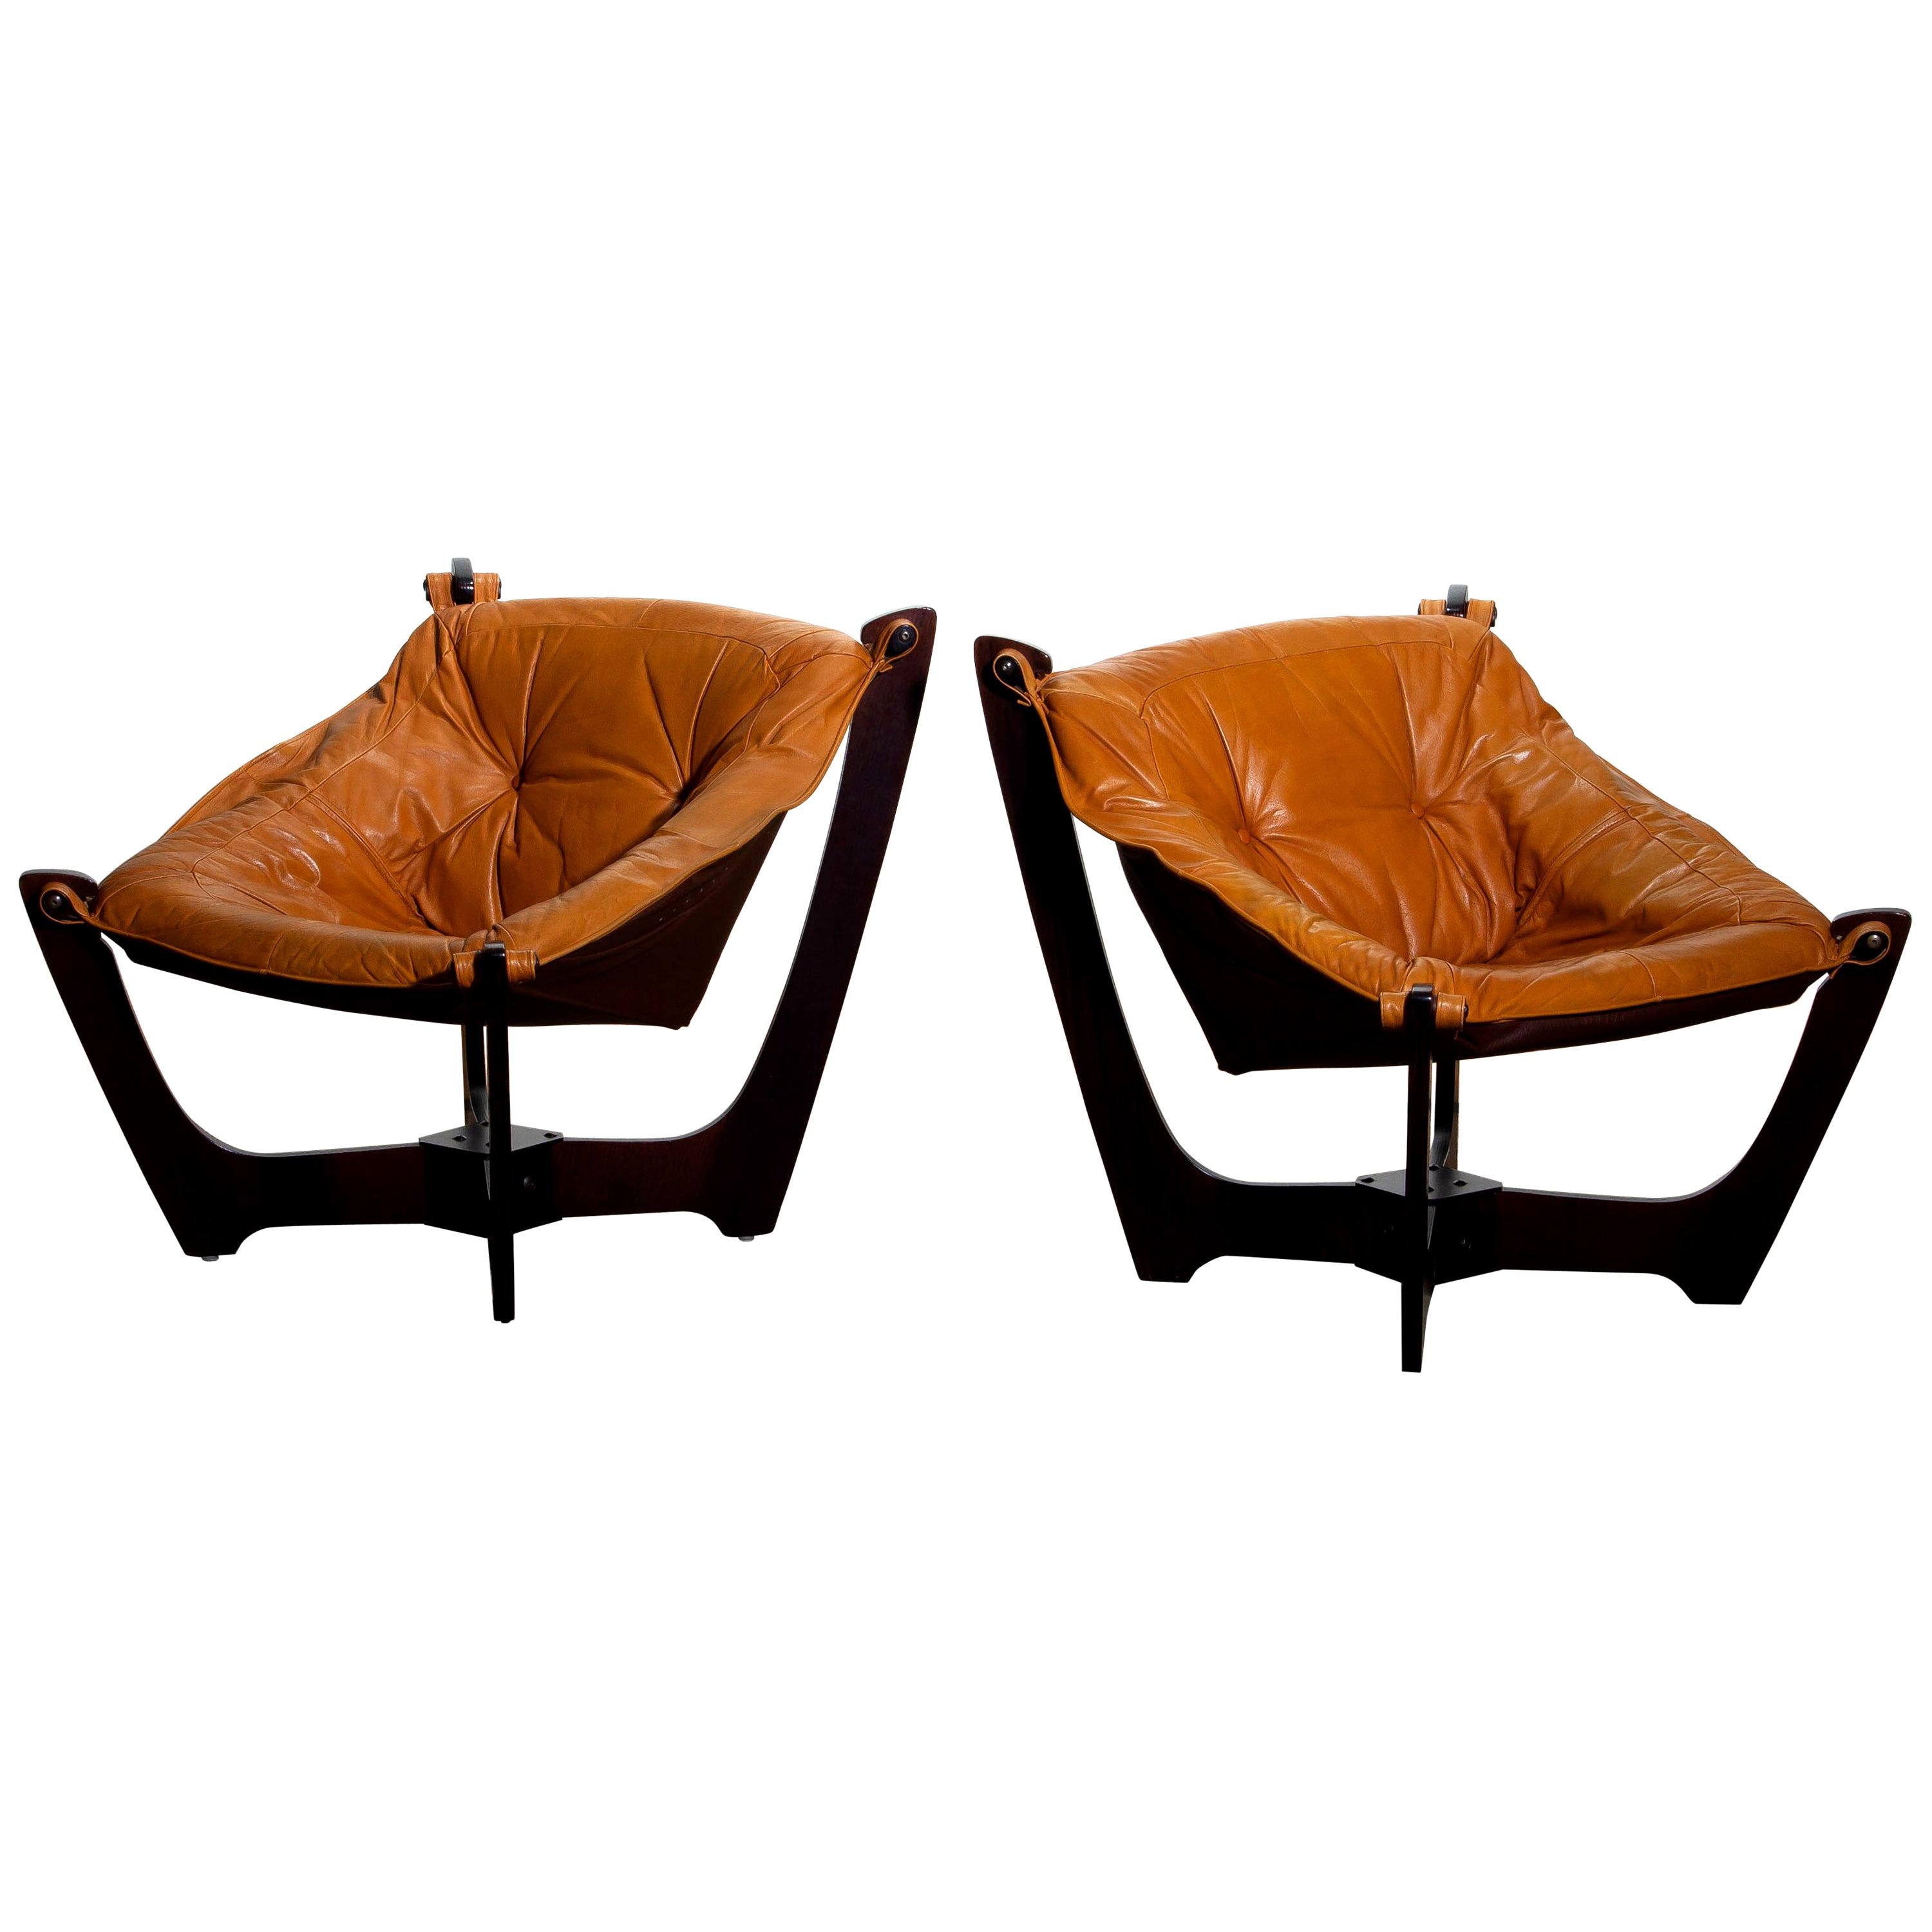 1970 Pair of Leather Lounge Chairs by Odd Knutsen for Hjellegjerde Møbler Norway 2